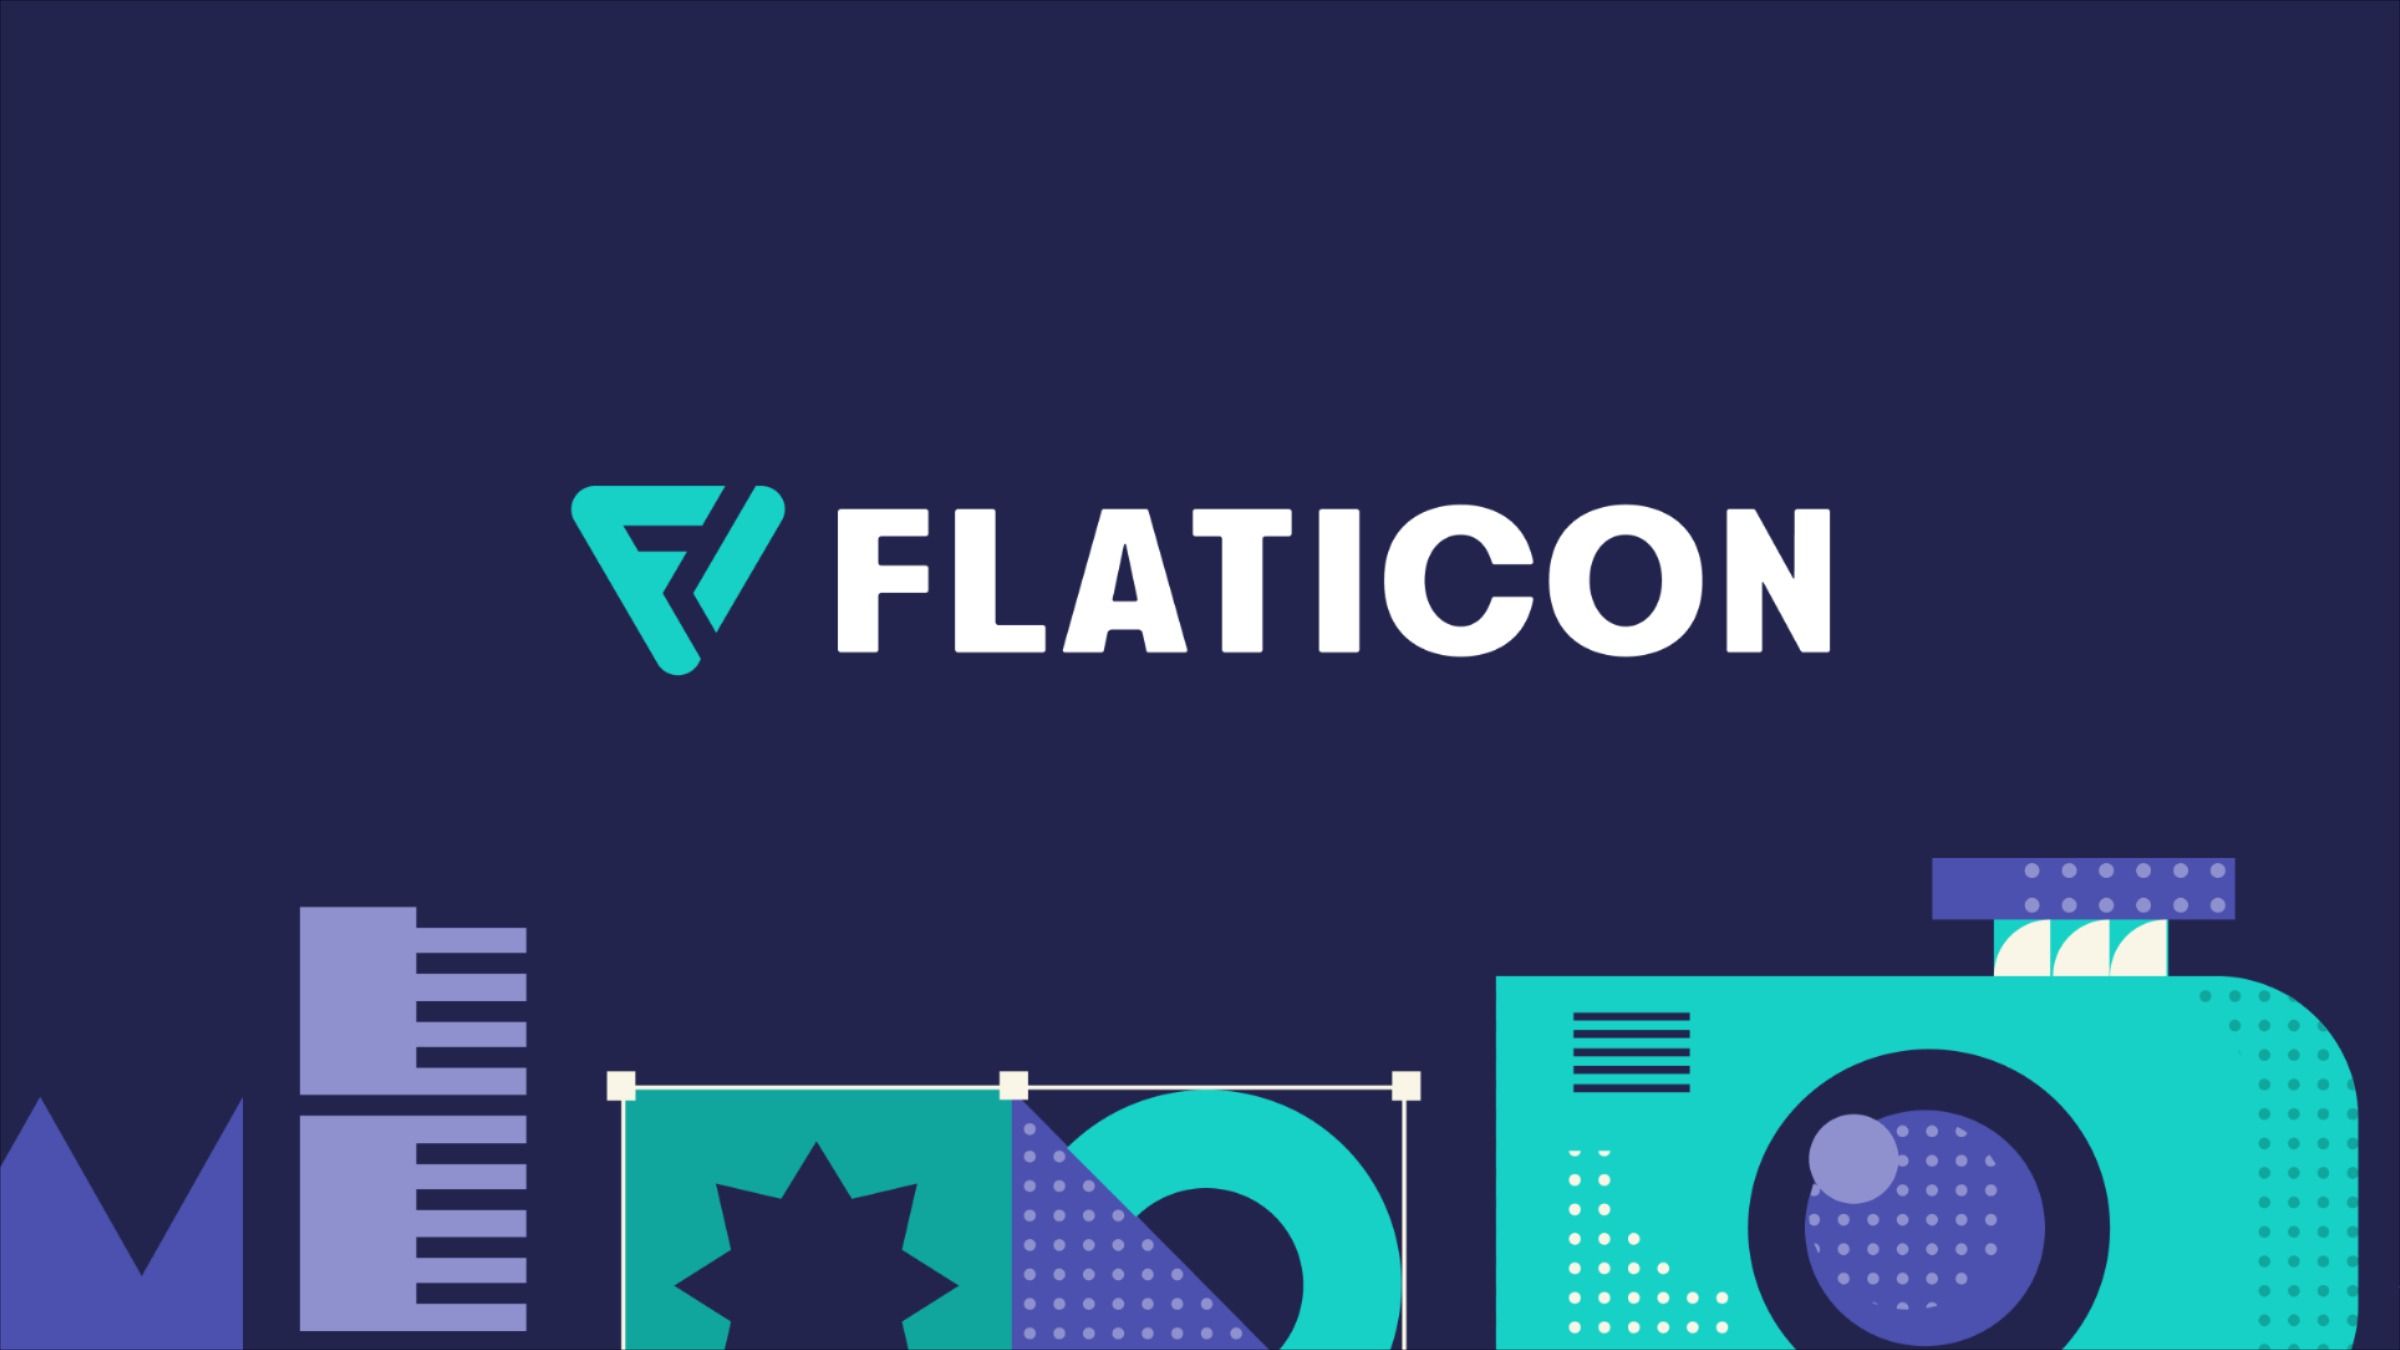 Introduction to Flaticon